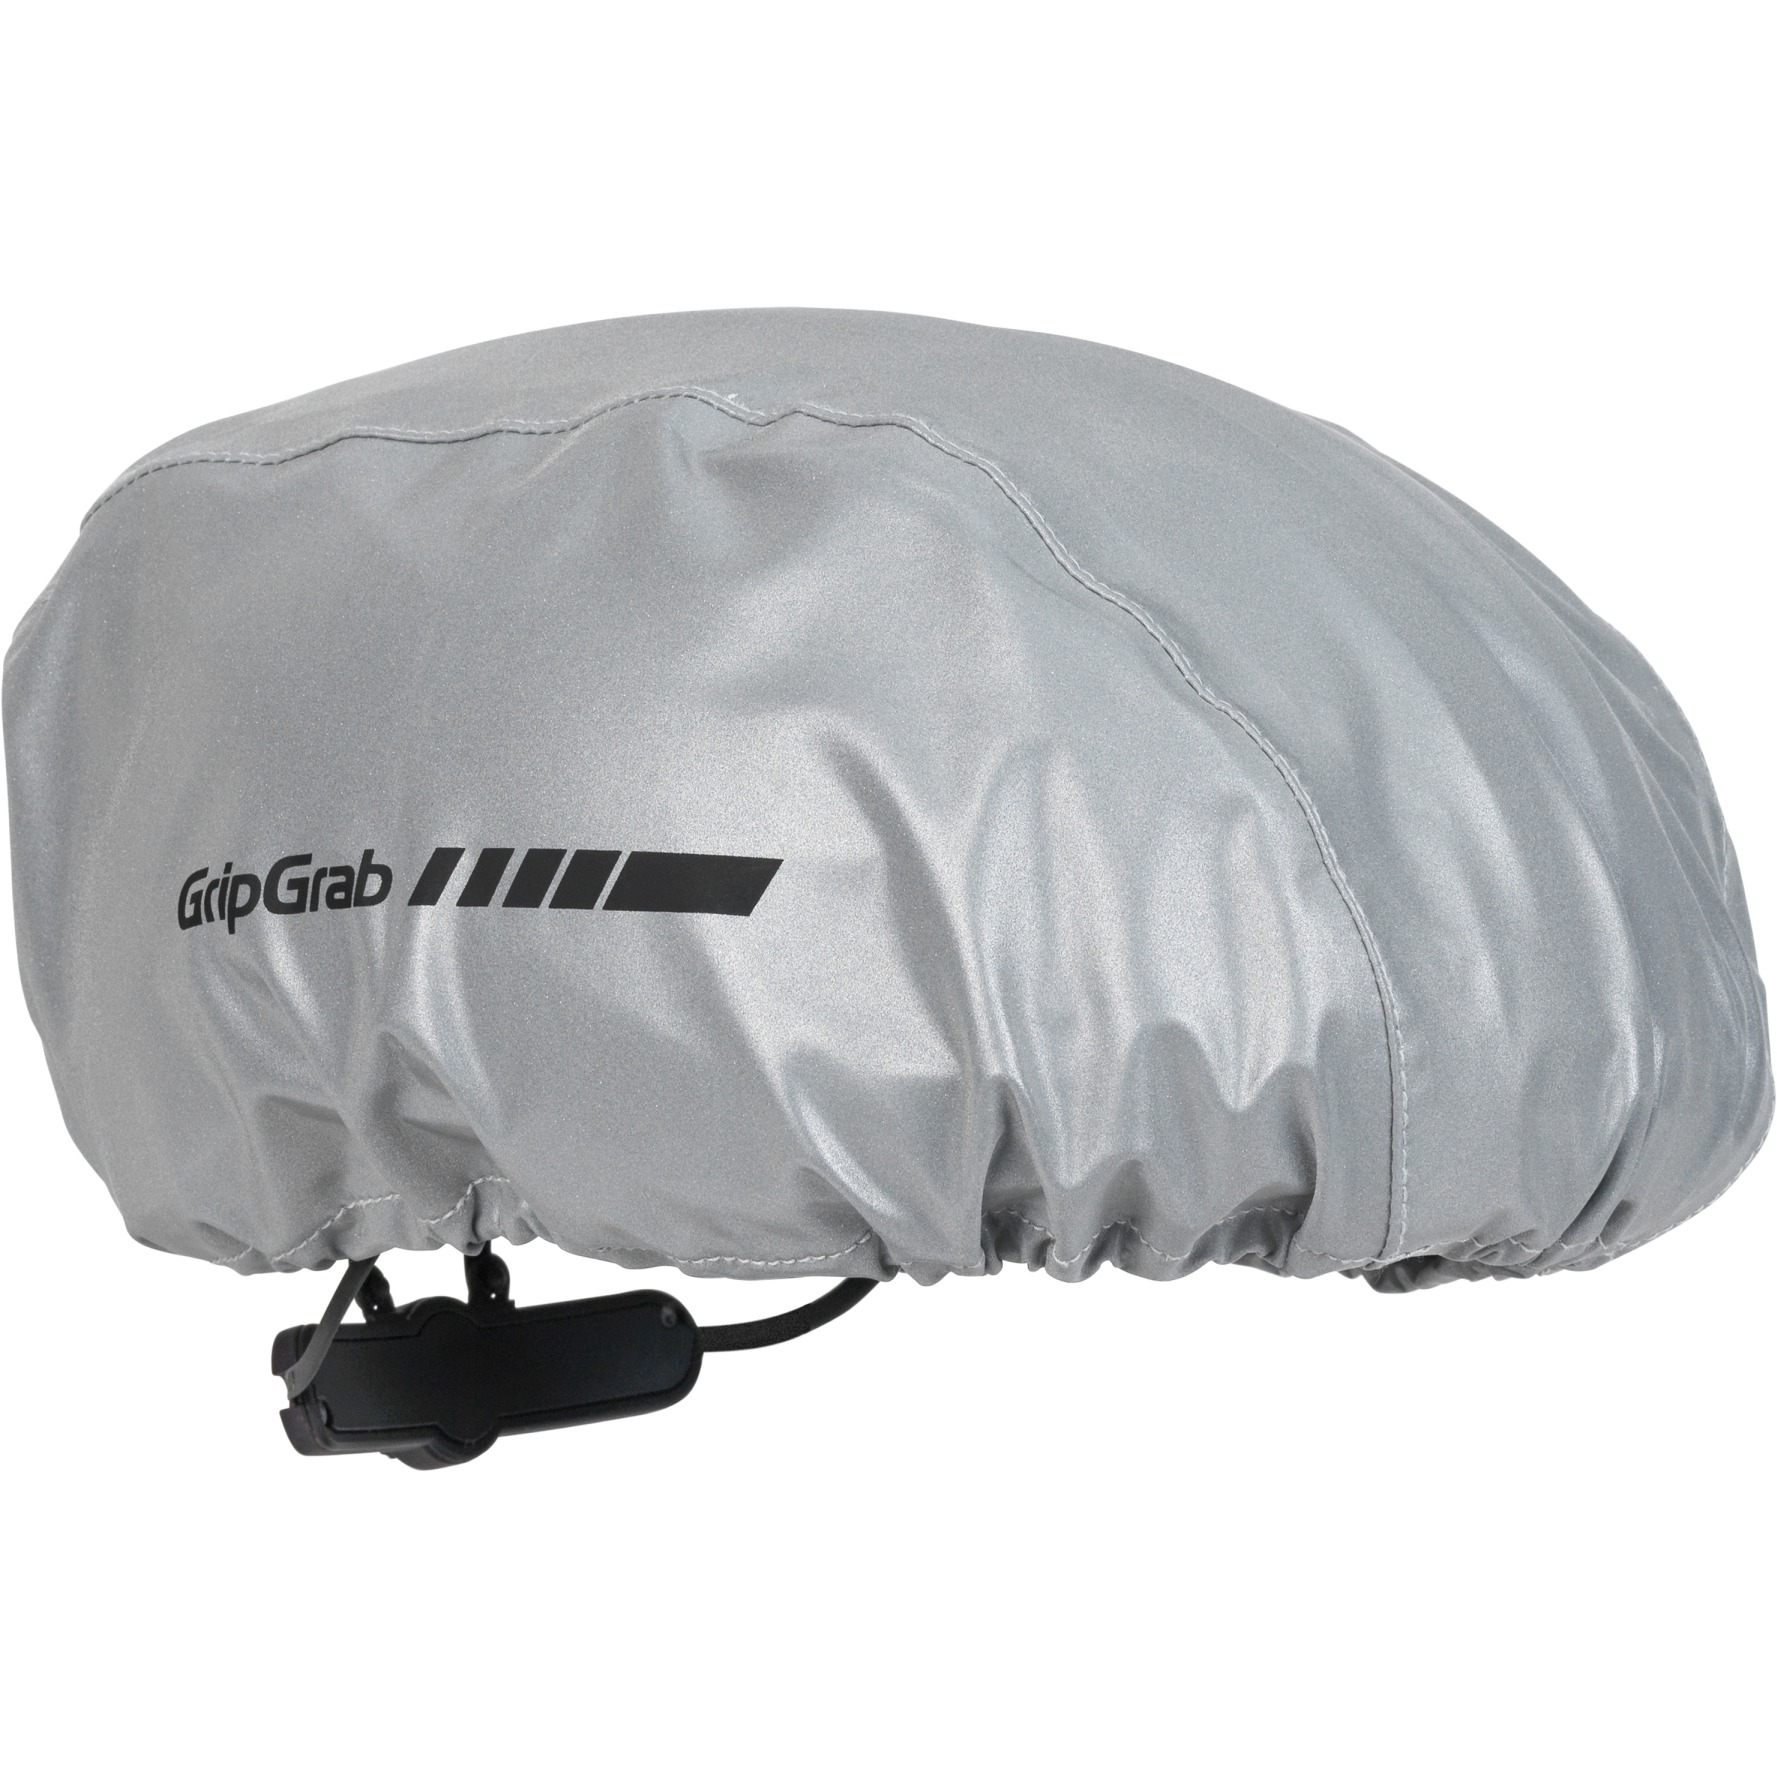 Picture of GripGrab Reflective Helmet Cover - Grey